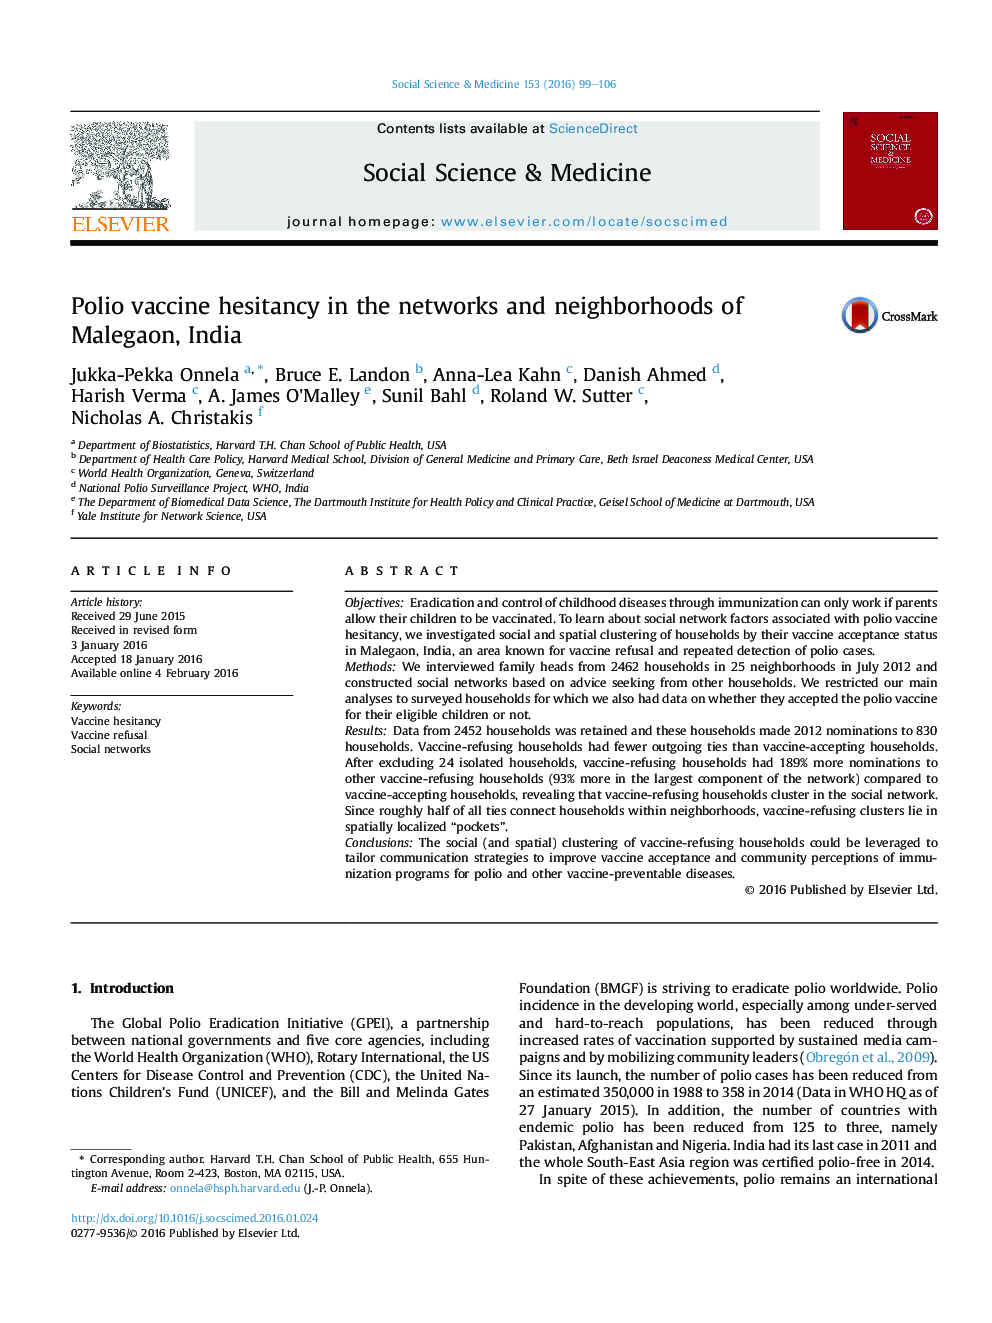 Polio vaccine hesitancy in the networks and neighborhoods of Malegaon, India